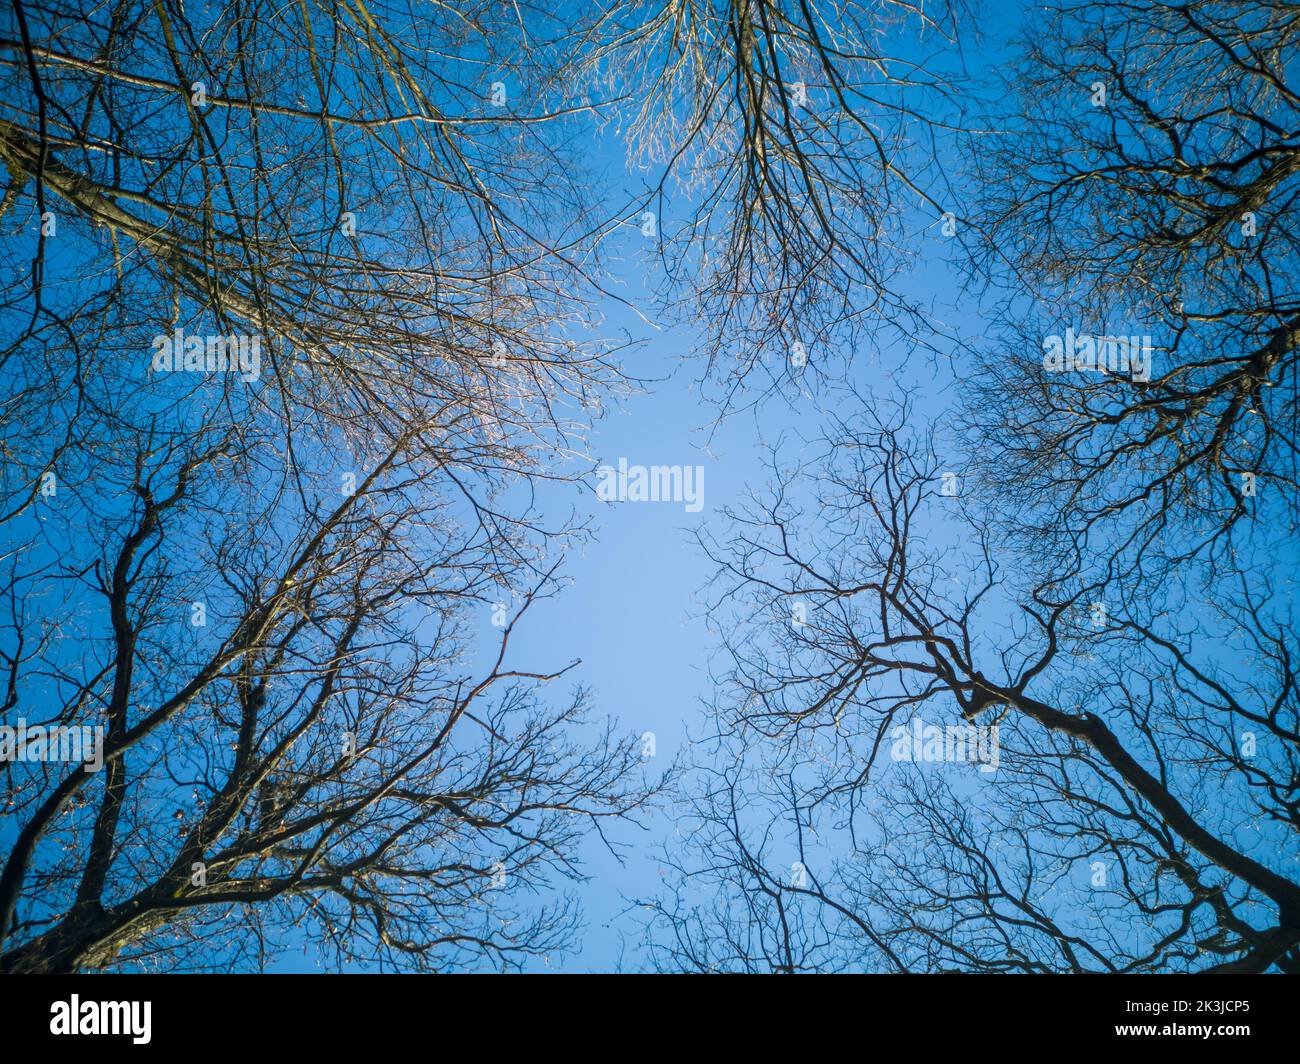 Looking up at trees in a forest in winter. Blue sky background Stock Photo